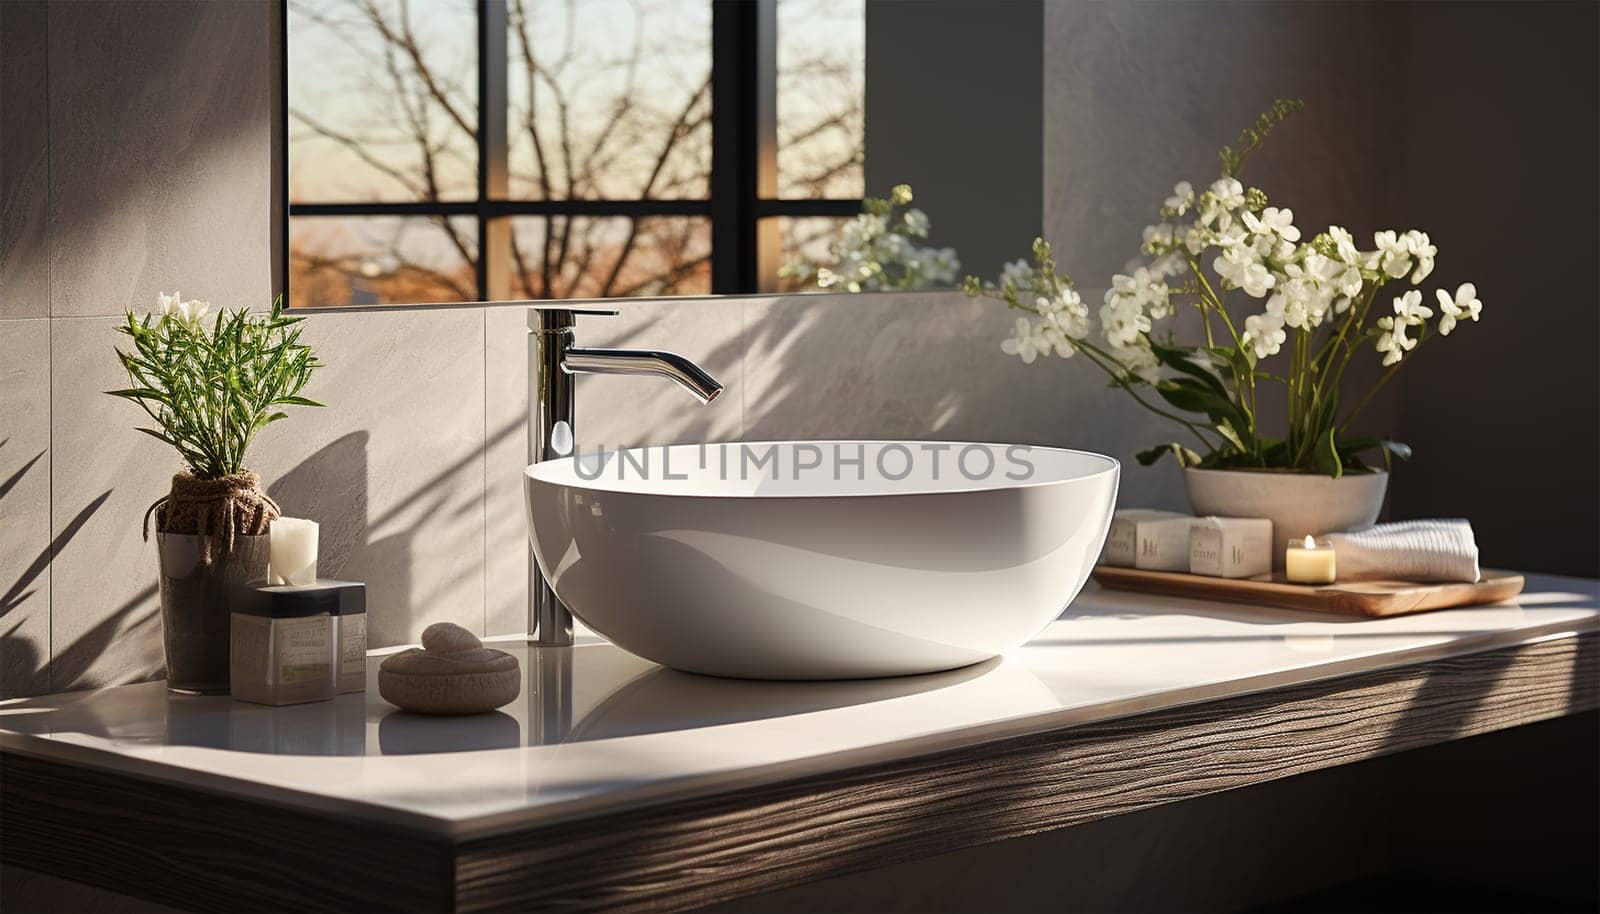 minimalistic bathroom featuring a natural stone countertop with a white sink, attached to a white wall. This mockup-ready countertop can serve as a display stand for bathroom products.3d rendering Luxury white marble bathroom close up